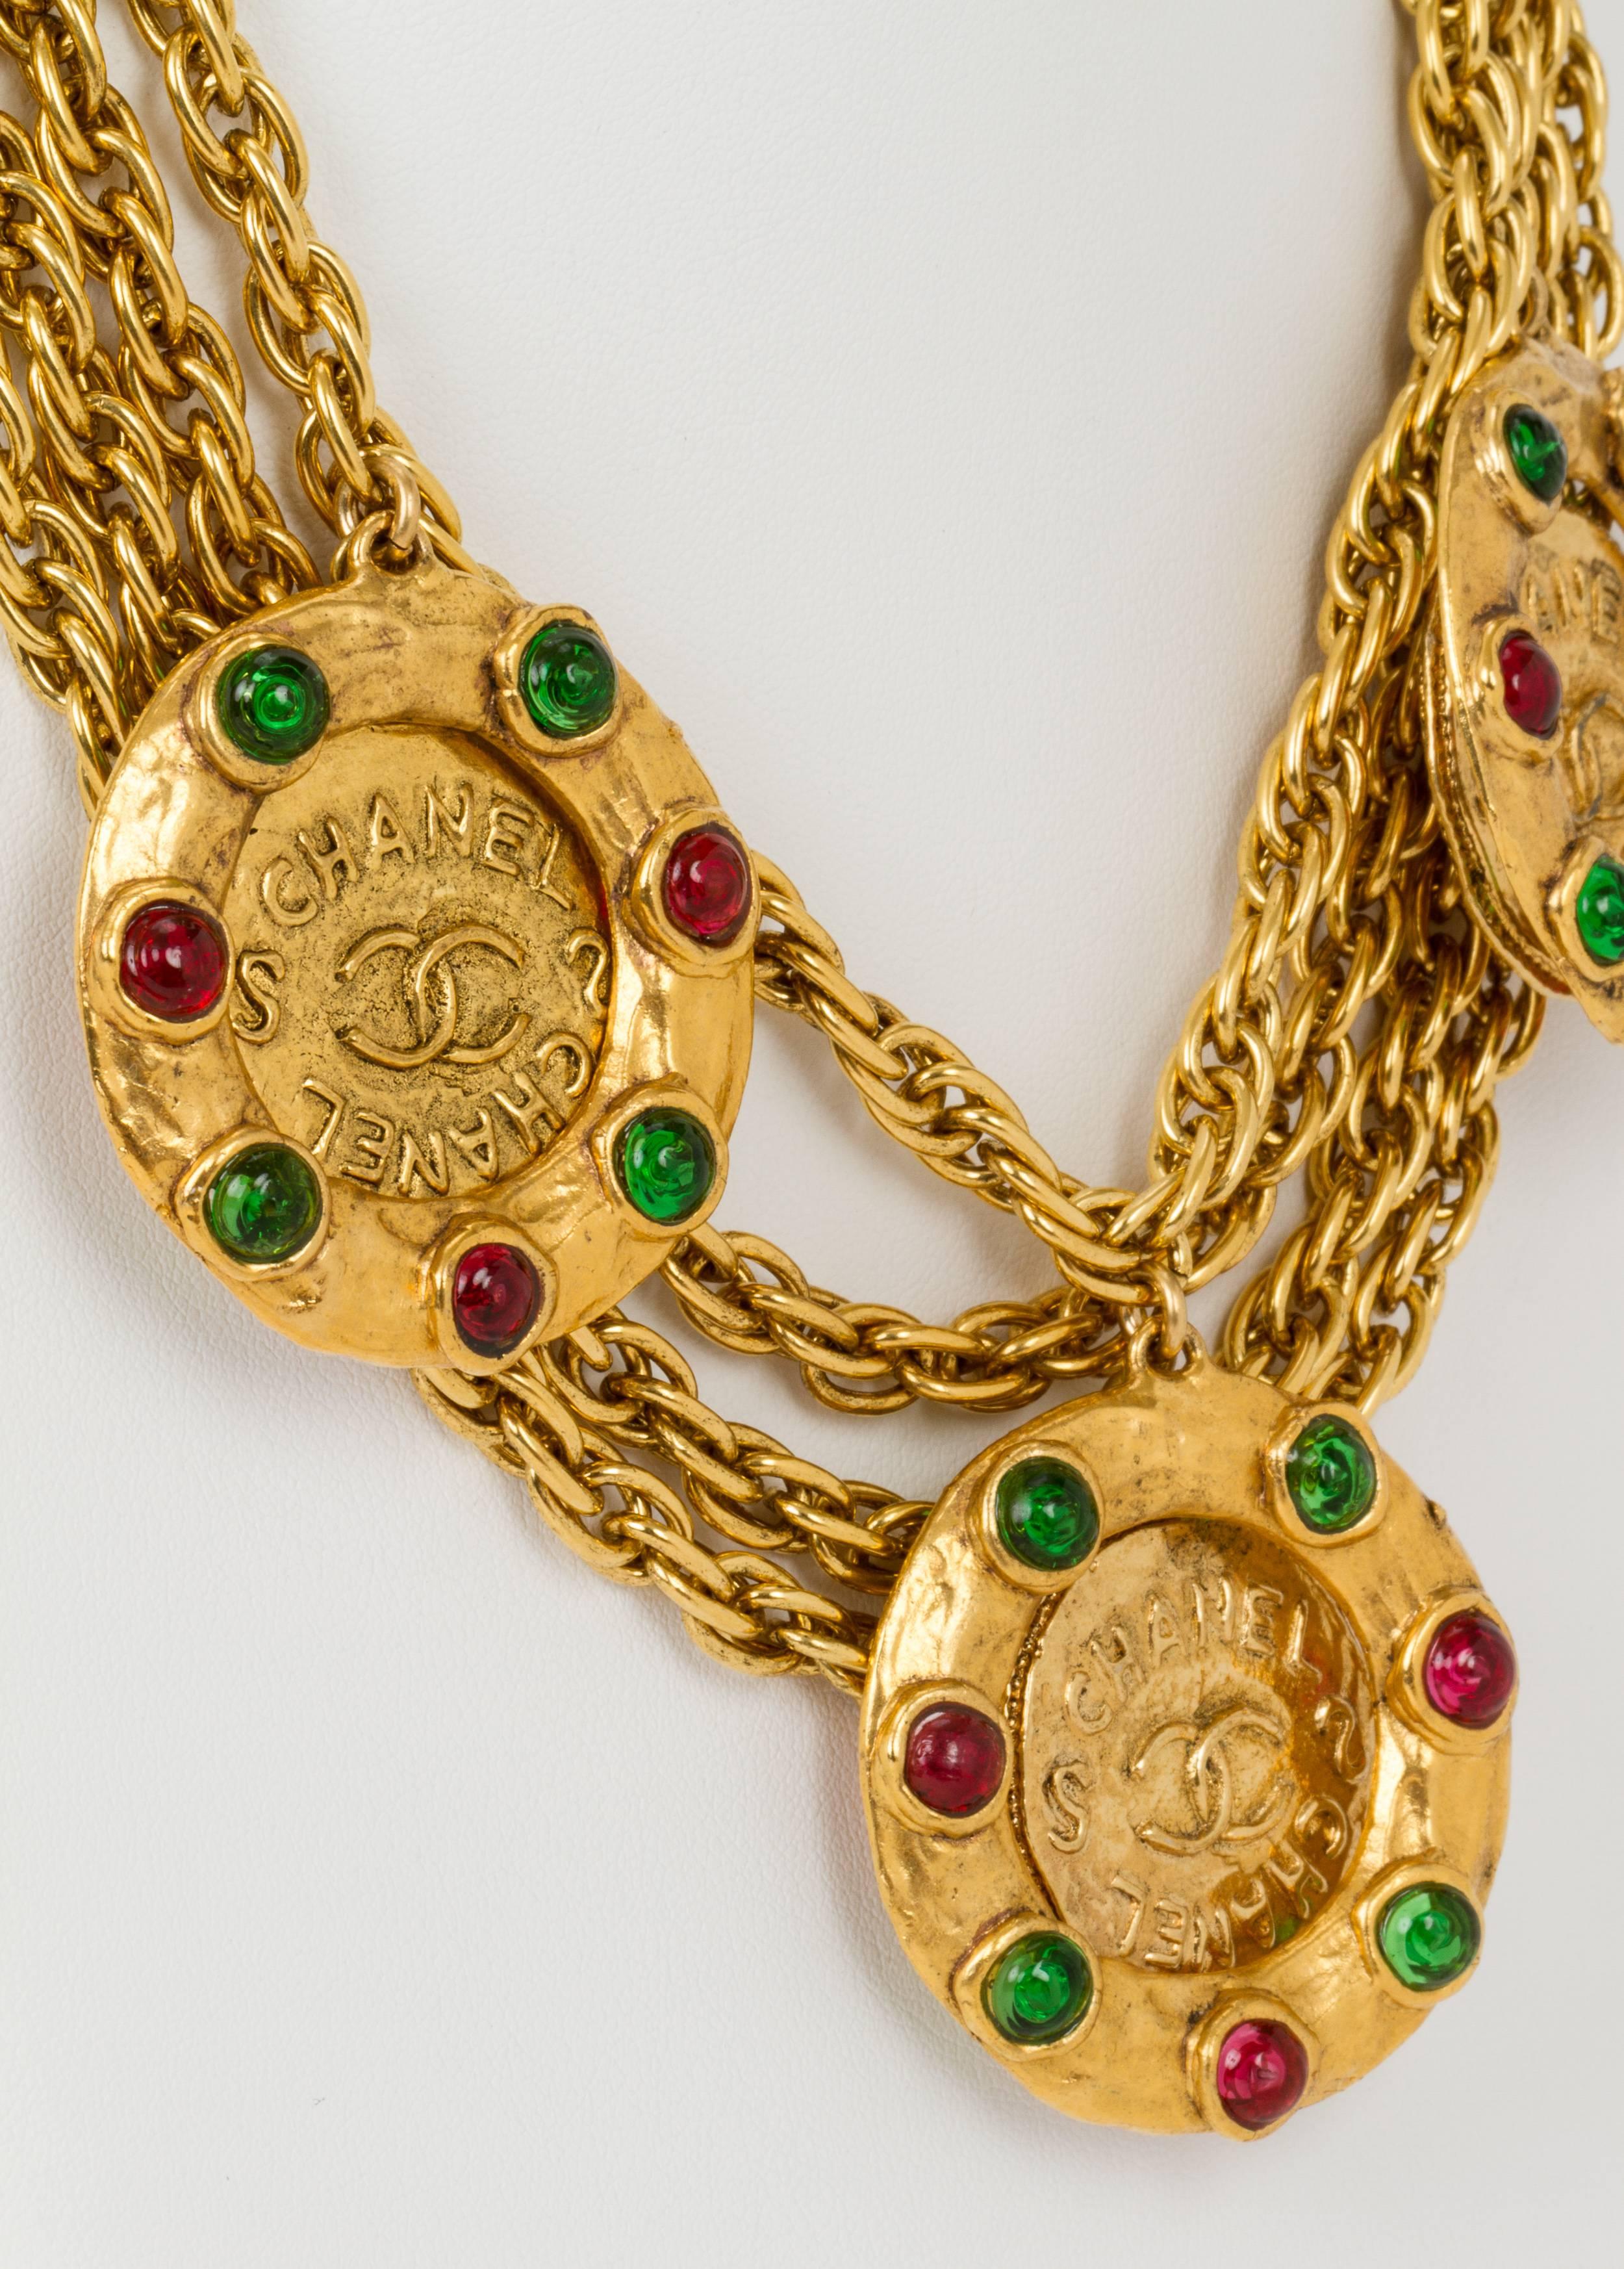 Rare 1970s Chanel oversize goldtone chain necklace with green and red gripoix dangling logo coins. From a private collection. Comes with the original vintage Chanel box.
